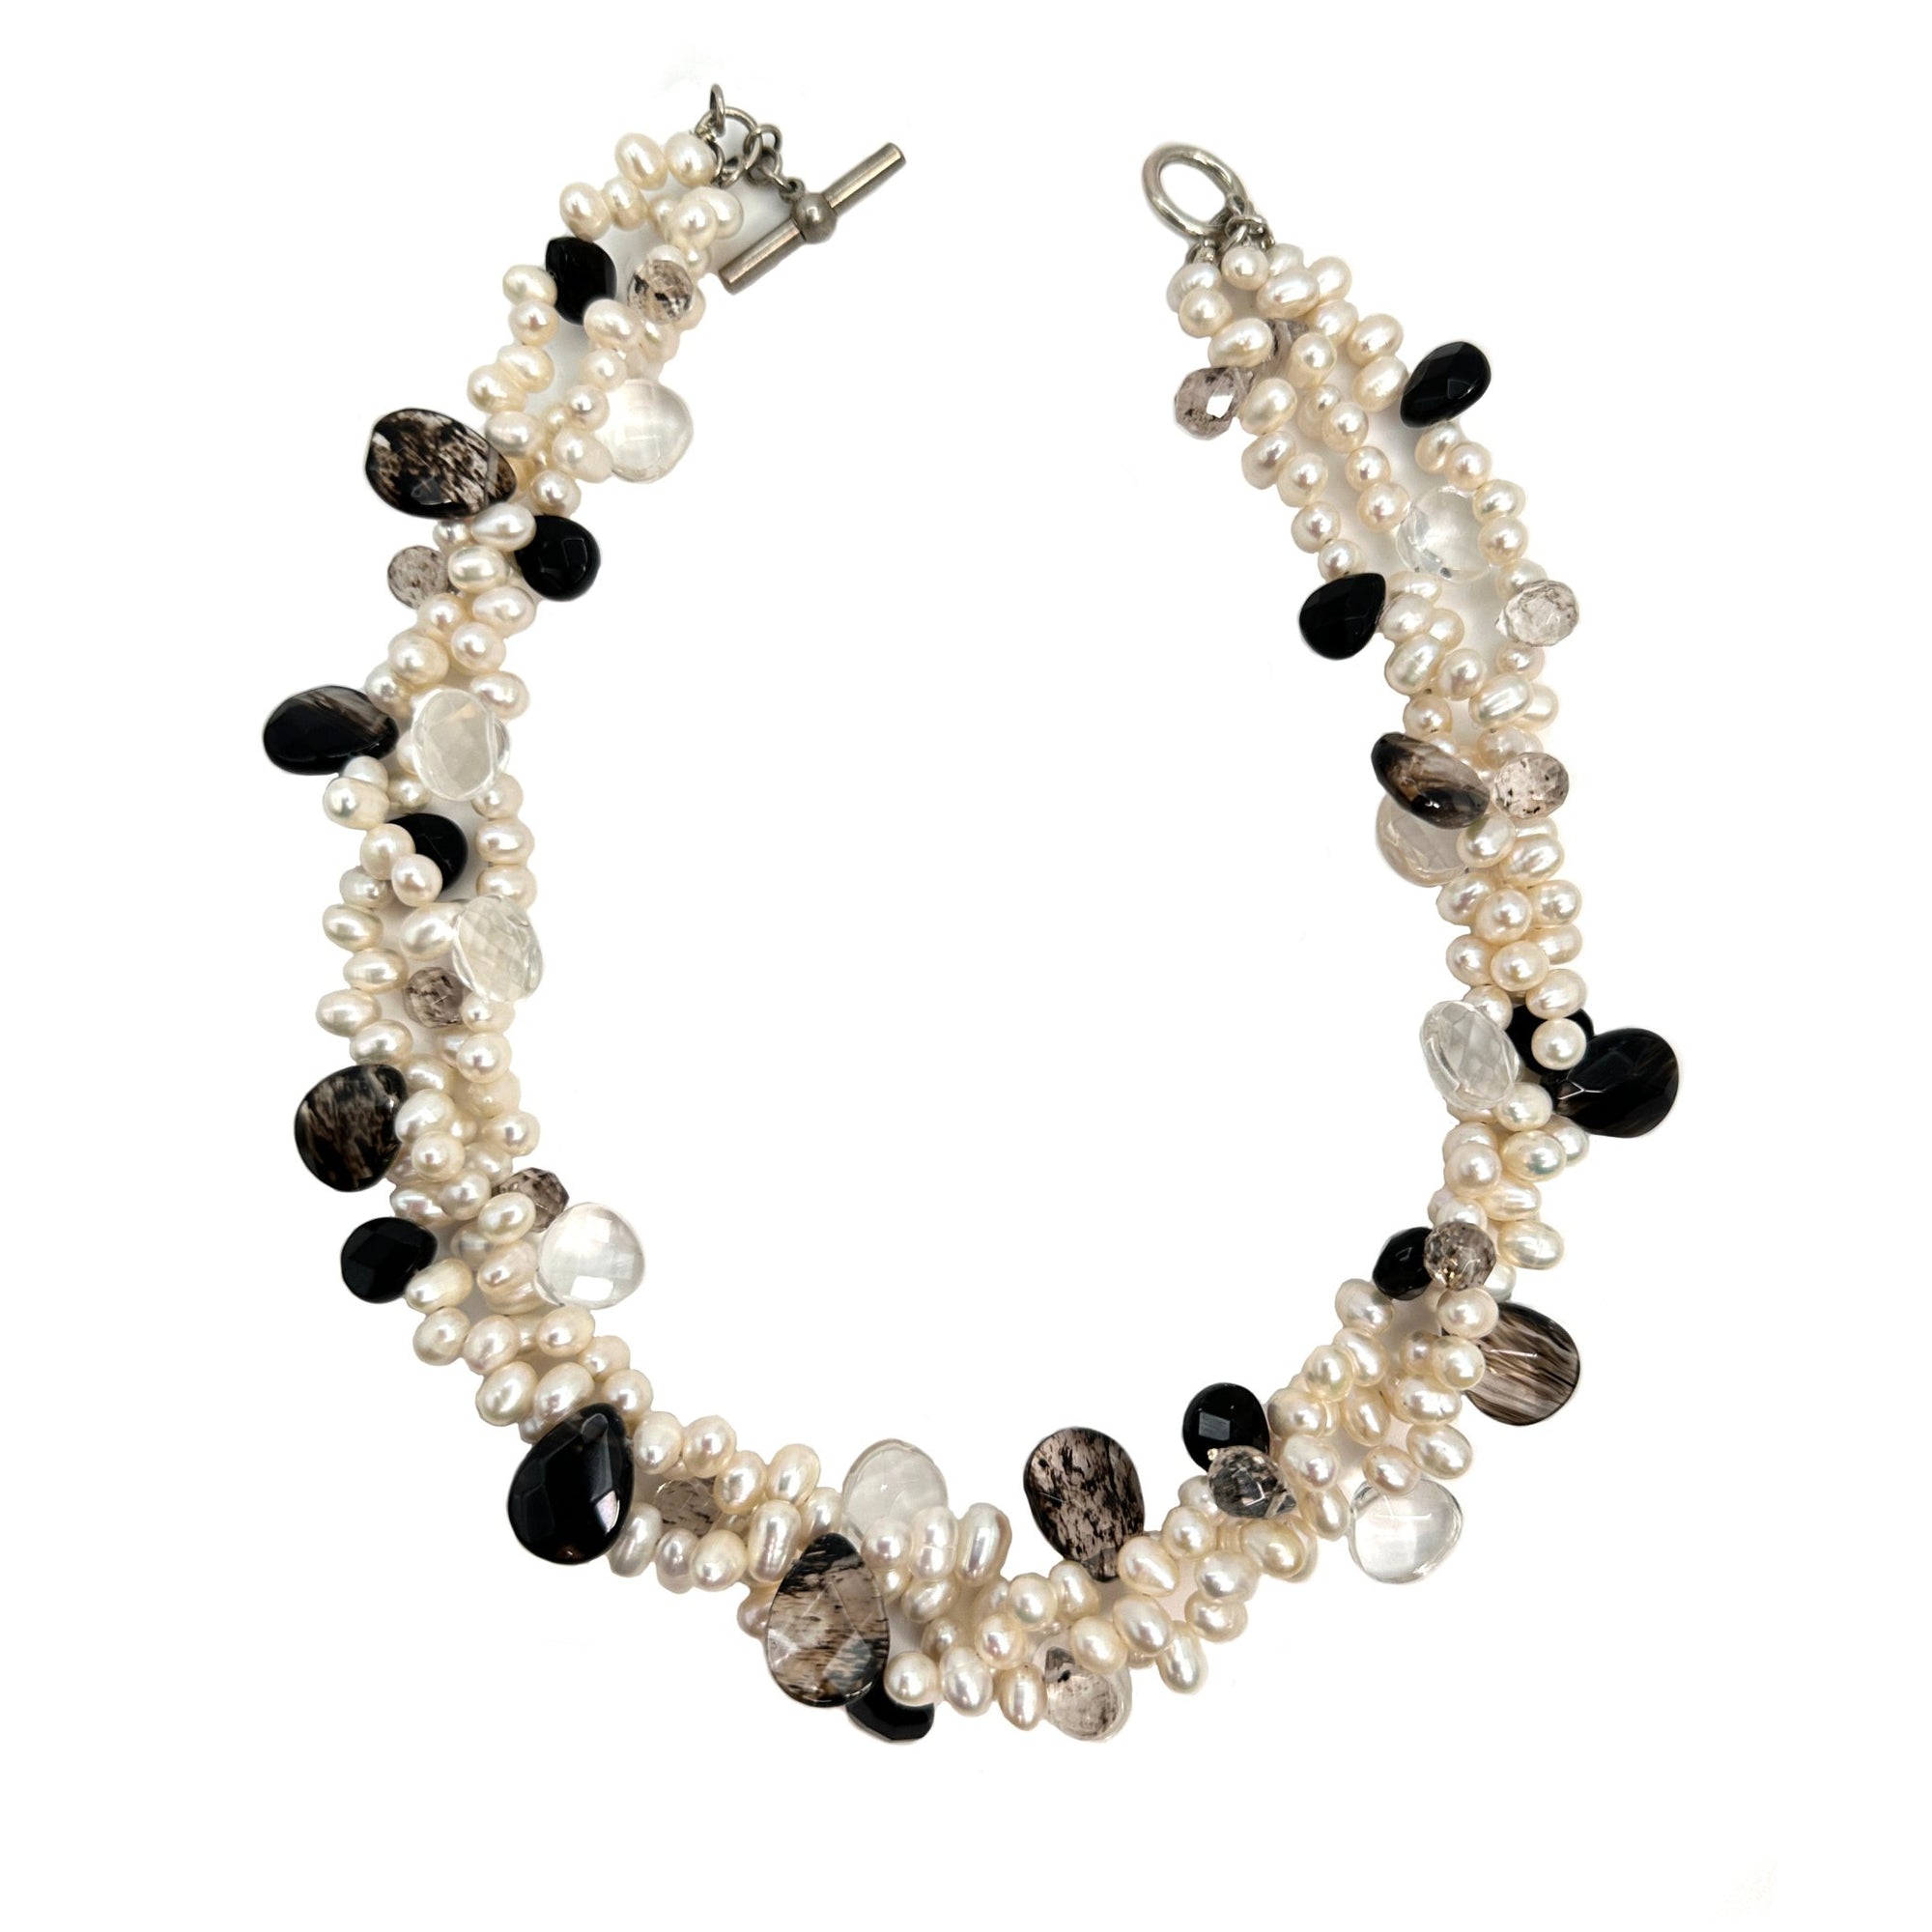 3-Strand Pearl & Stone Necklace